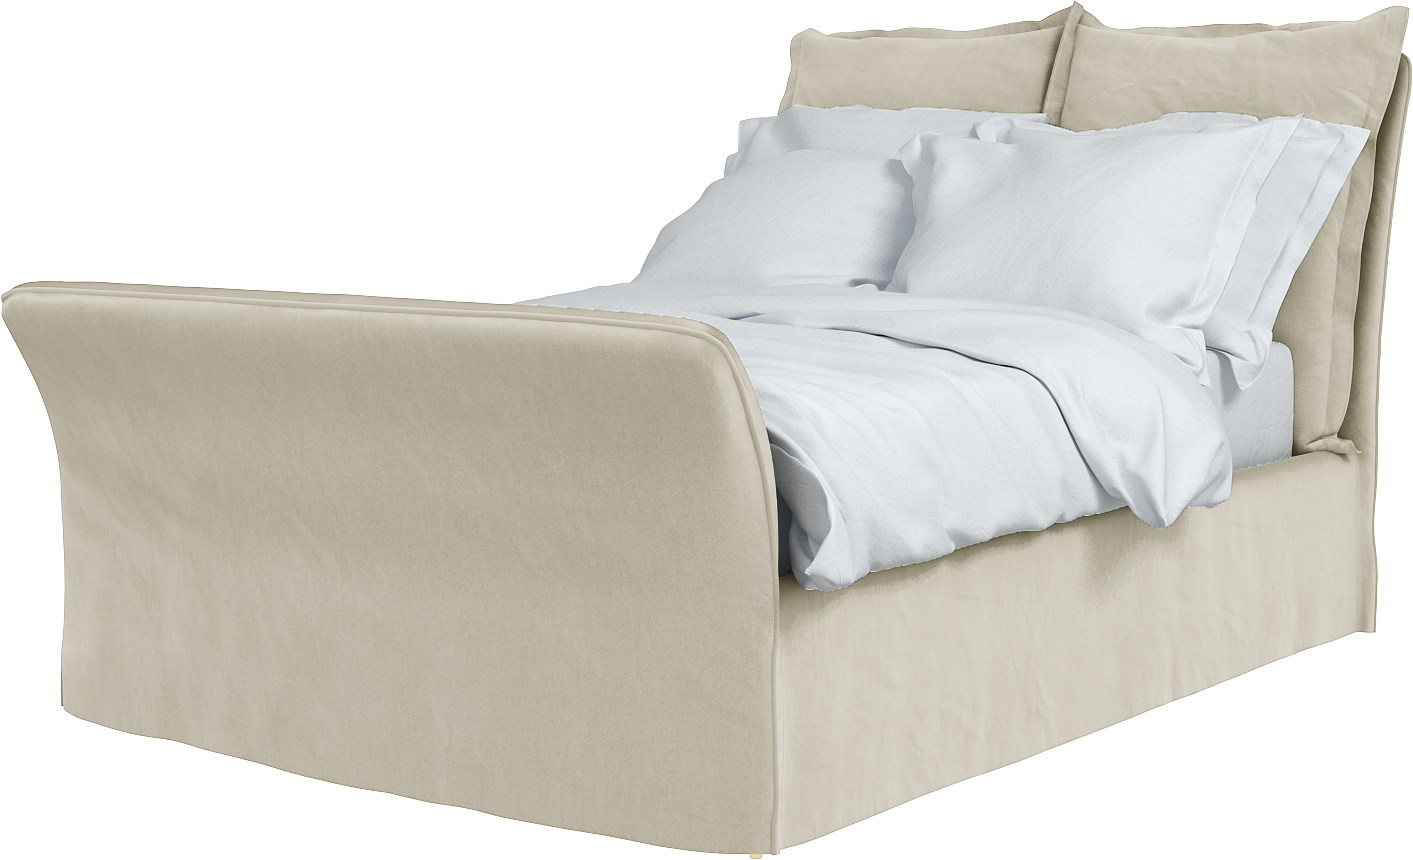 Double Footer Bed | Song Range